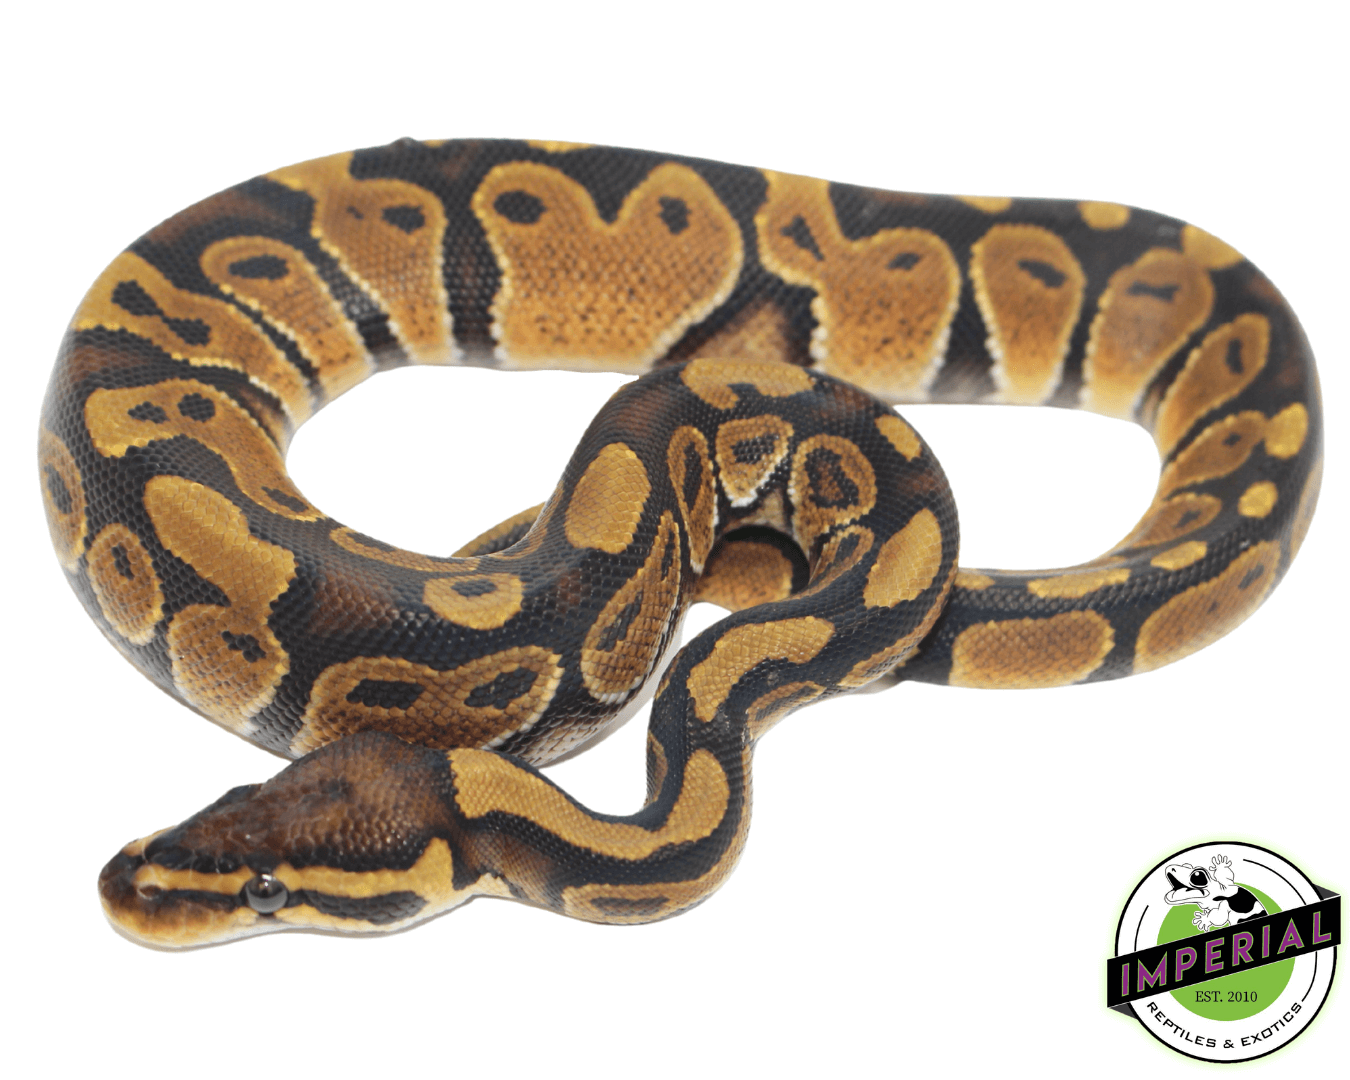 chocolate ball python for sale, buy reptiles online